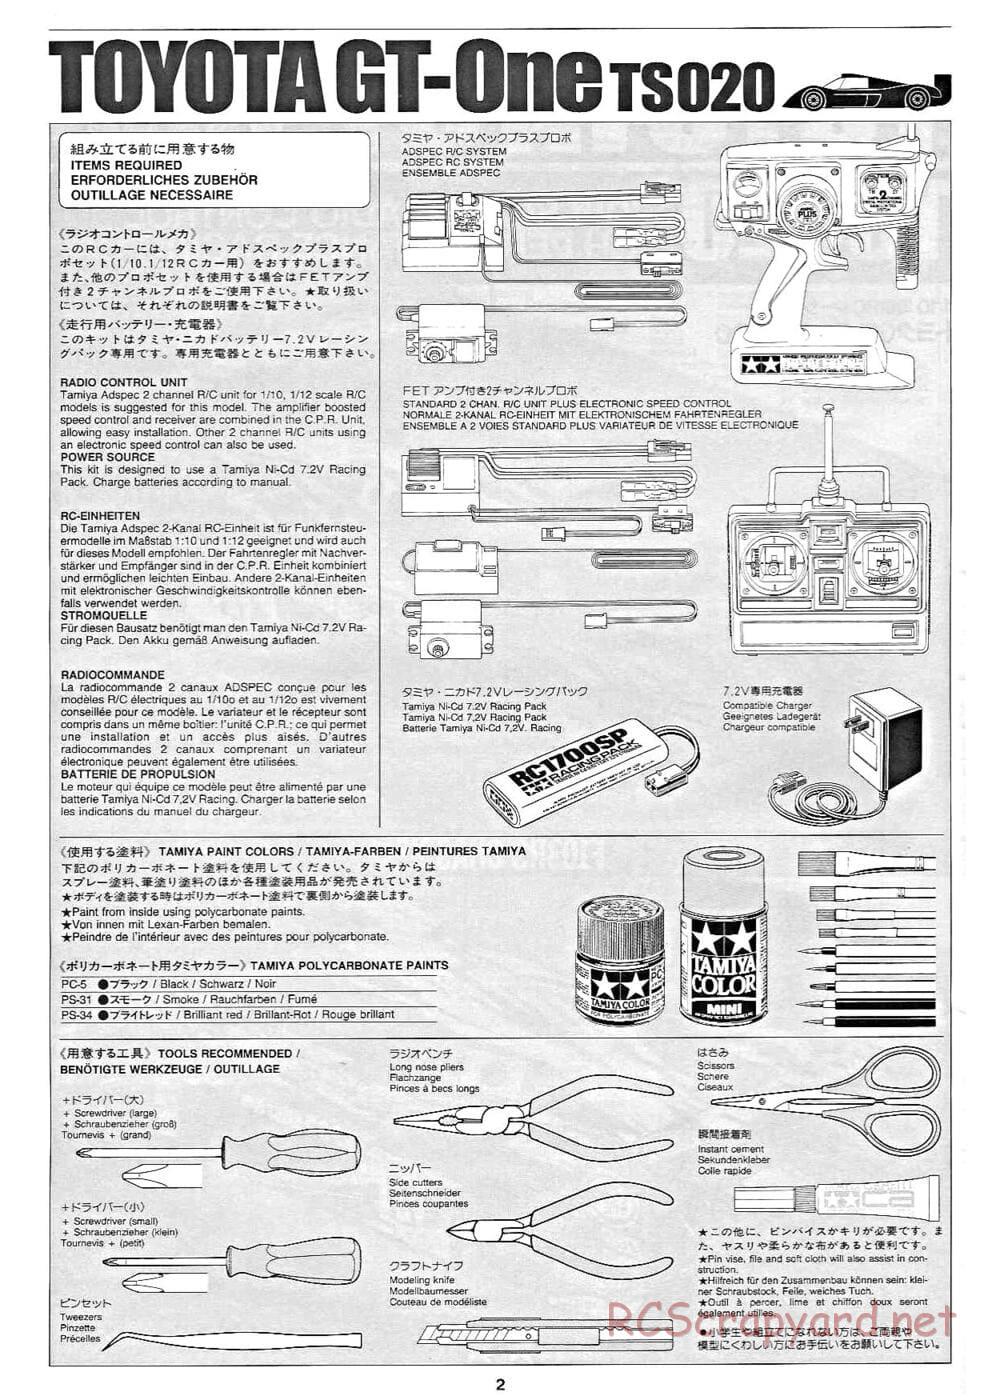 Tamiya - Toyota GT-One TS020 - F103RS Chassis - Manual - Page 2